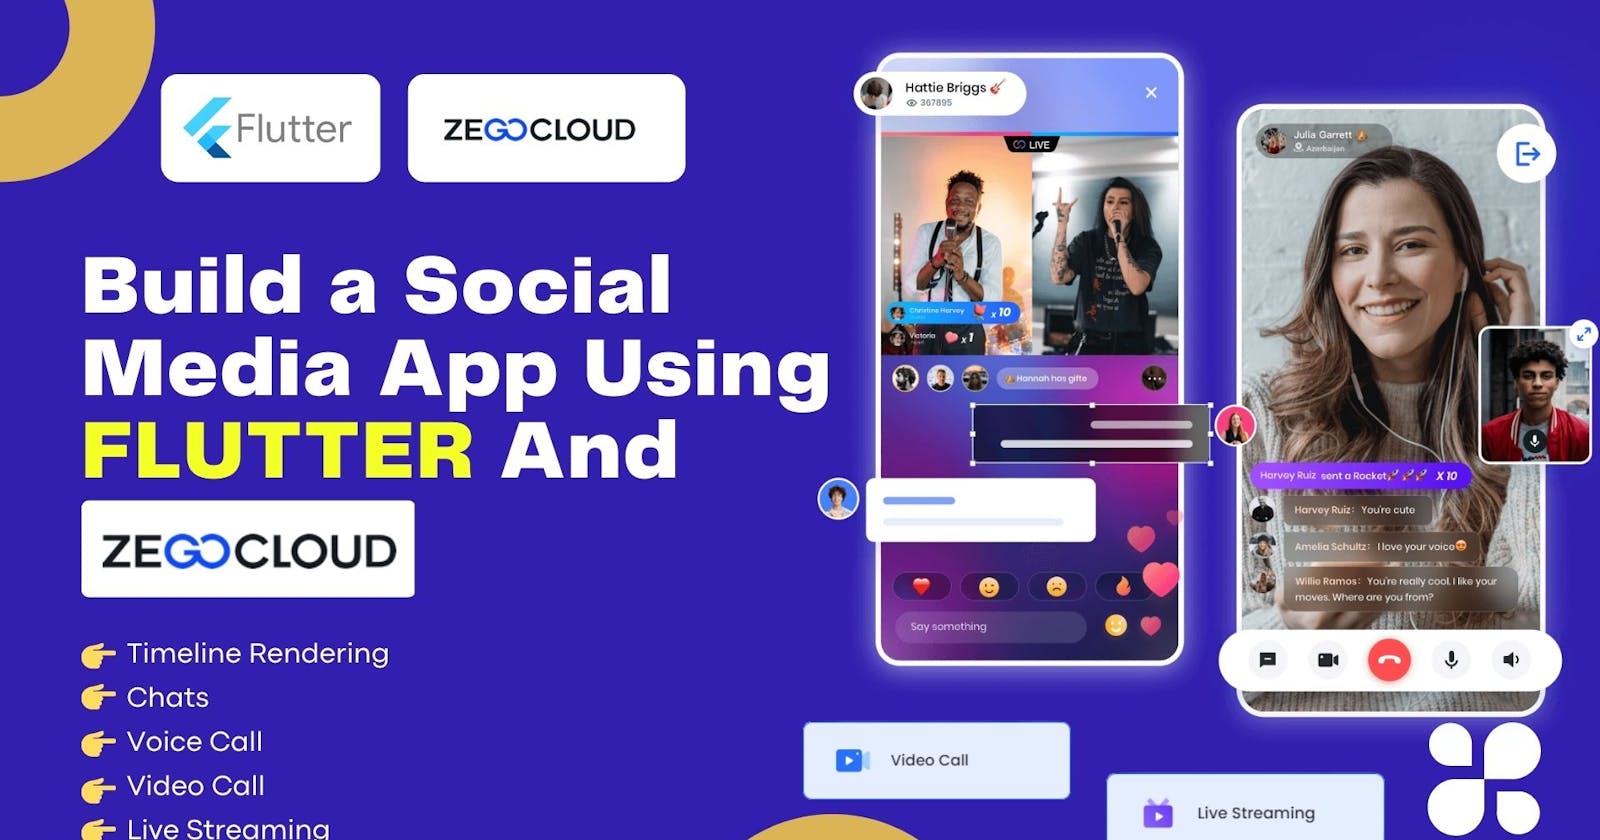 Full Featured  Video Call App in Flutter in 7 Mins - Using ZegoCloud